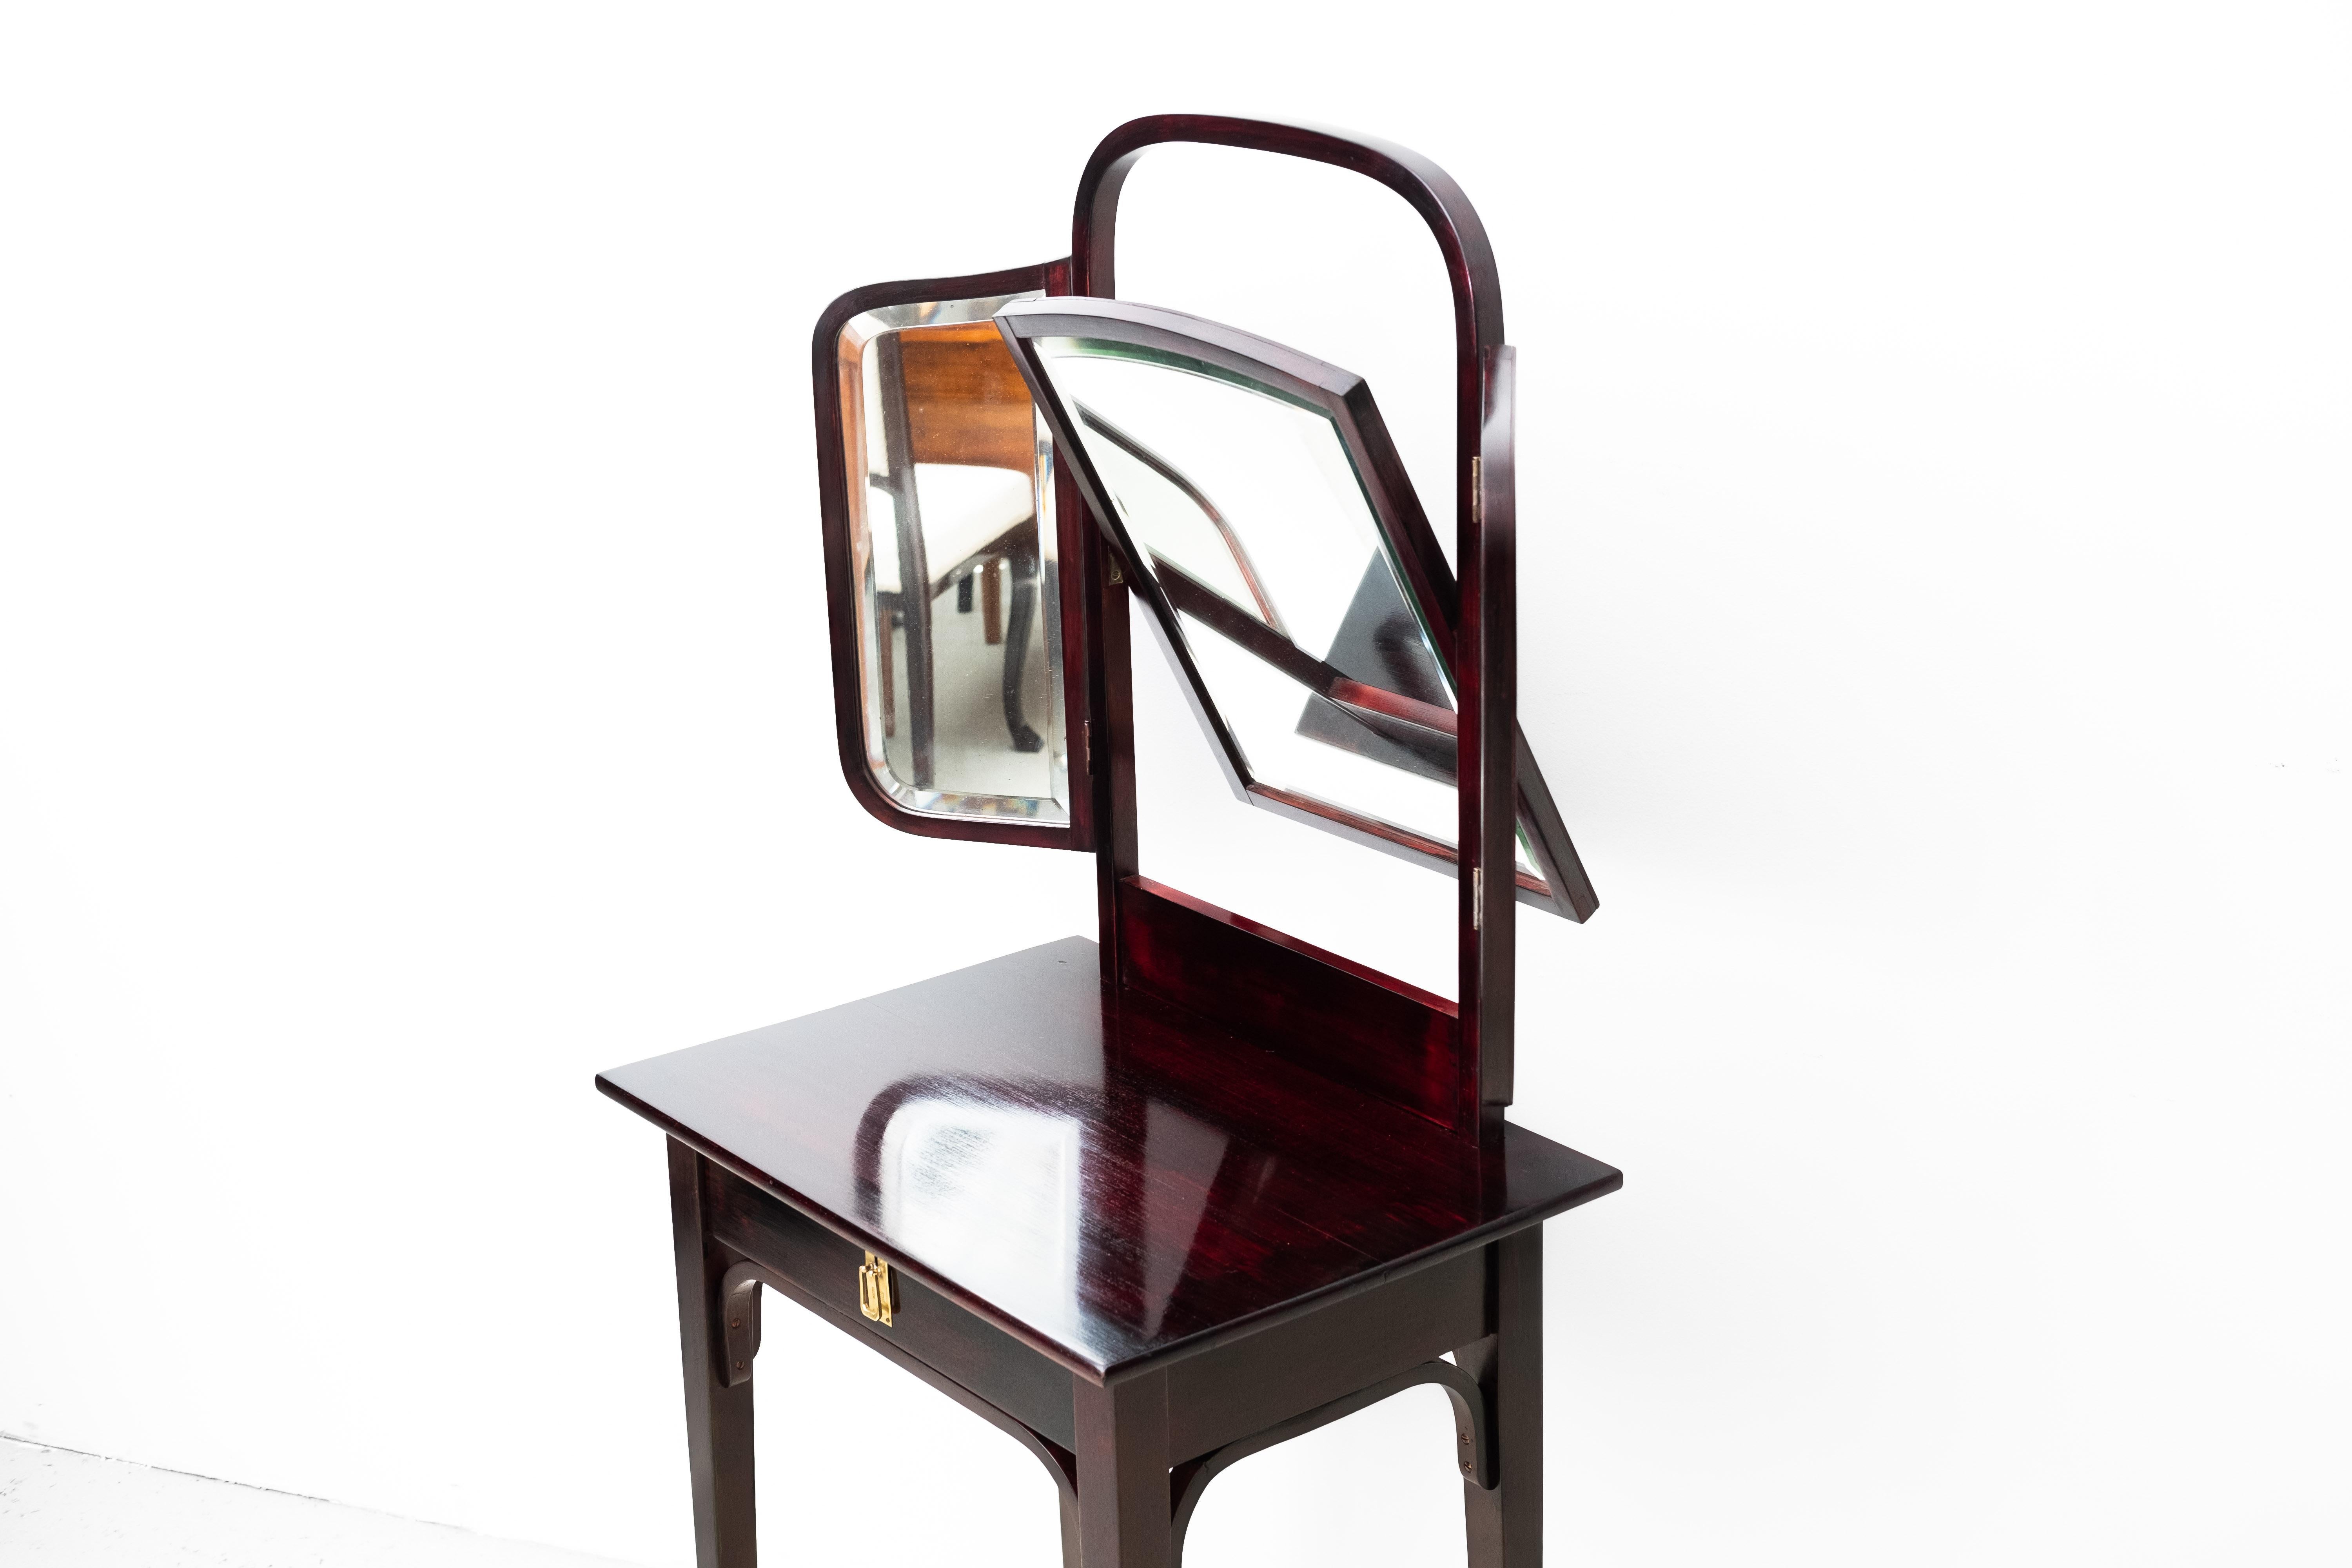 Art Nouveau Dressingtable from Thonet Brothers, Model 23045 (Vienna, 1910) For Sale 4